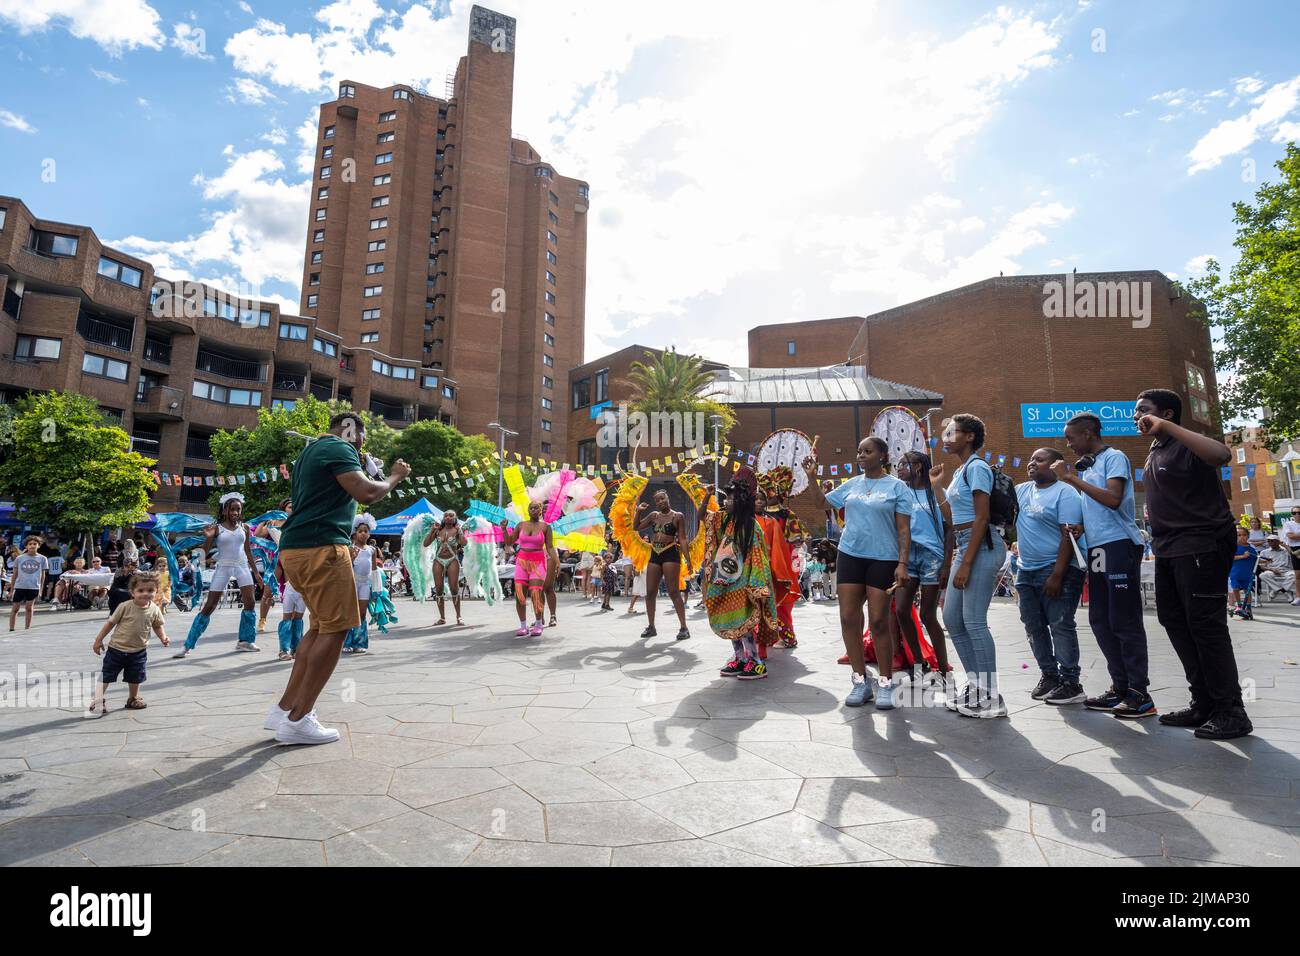 London, UK.  5 August 2022. Rapper TriniBoi Joocie (L) performs at Carnival in Chelsea, an event showcasing carnival costumes, music and culture.  The show is outside The Chelsea Theatre and is part of this year’s Kensington & Chelsea Festival. Credit: Stephen Chung / Alamy Live News Stock Photo